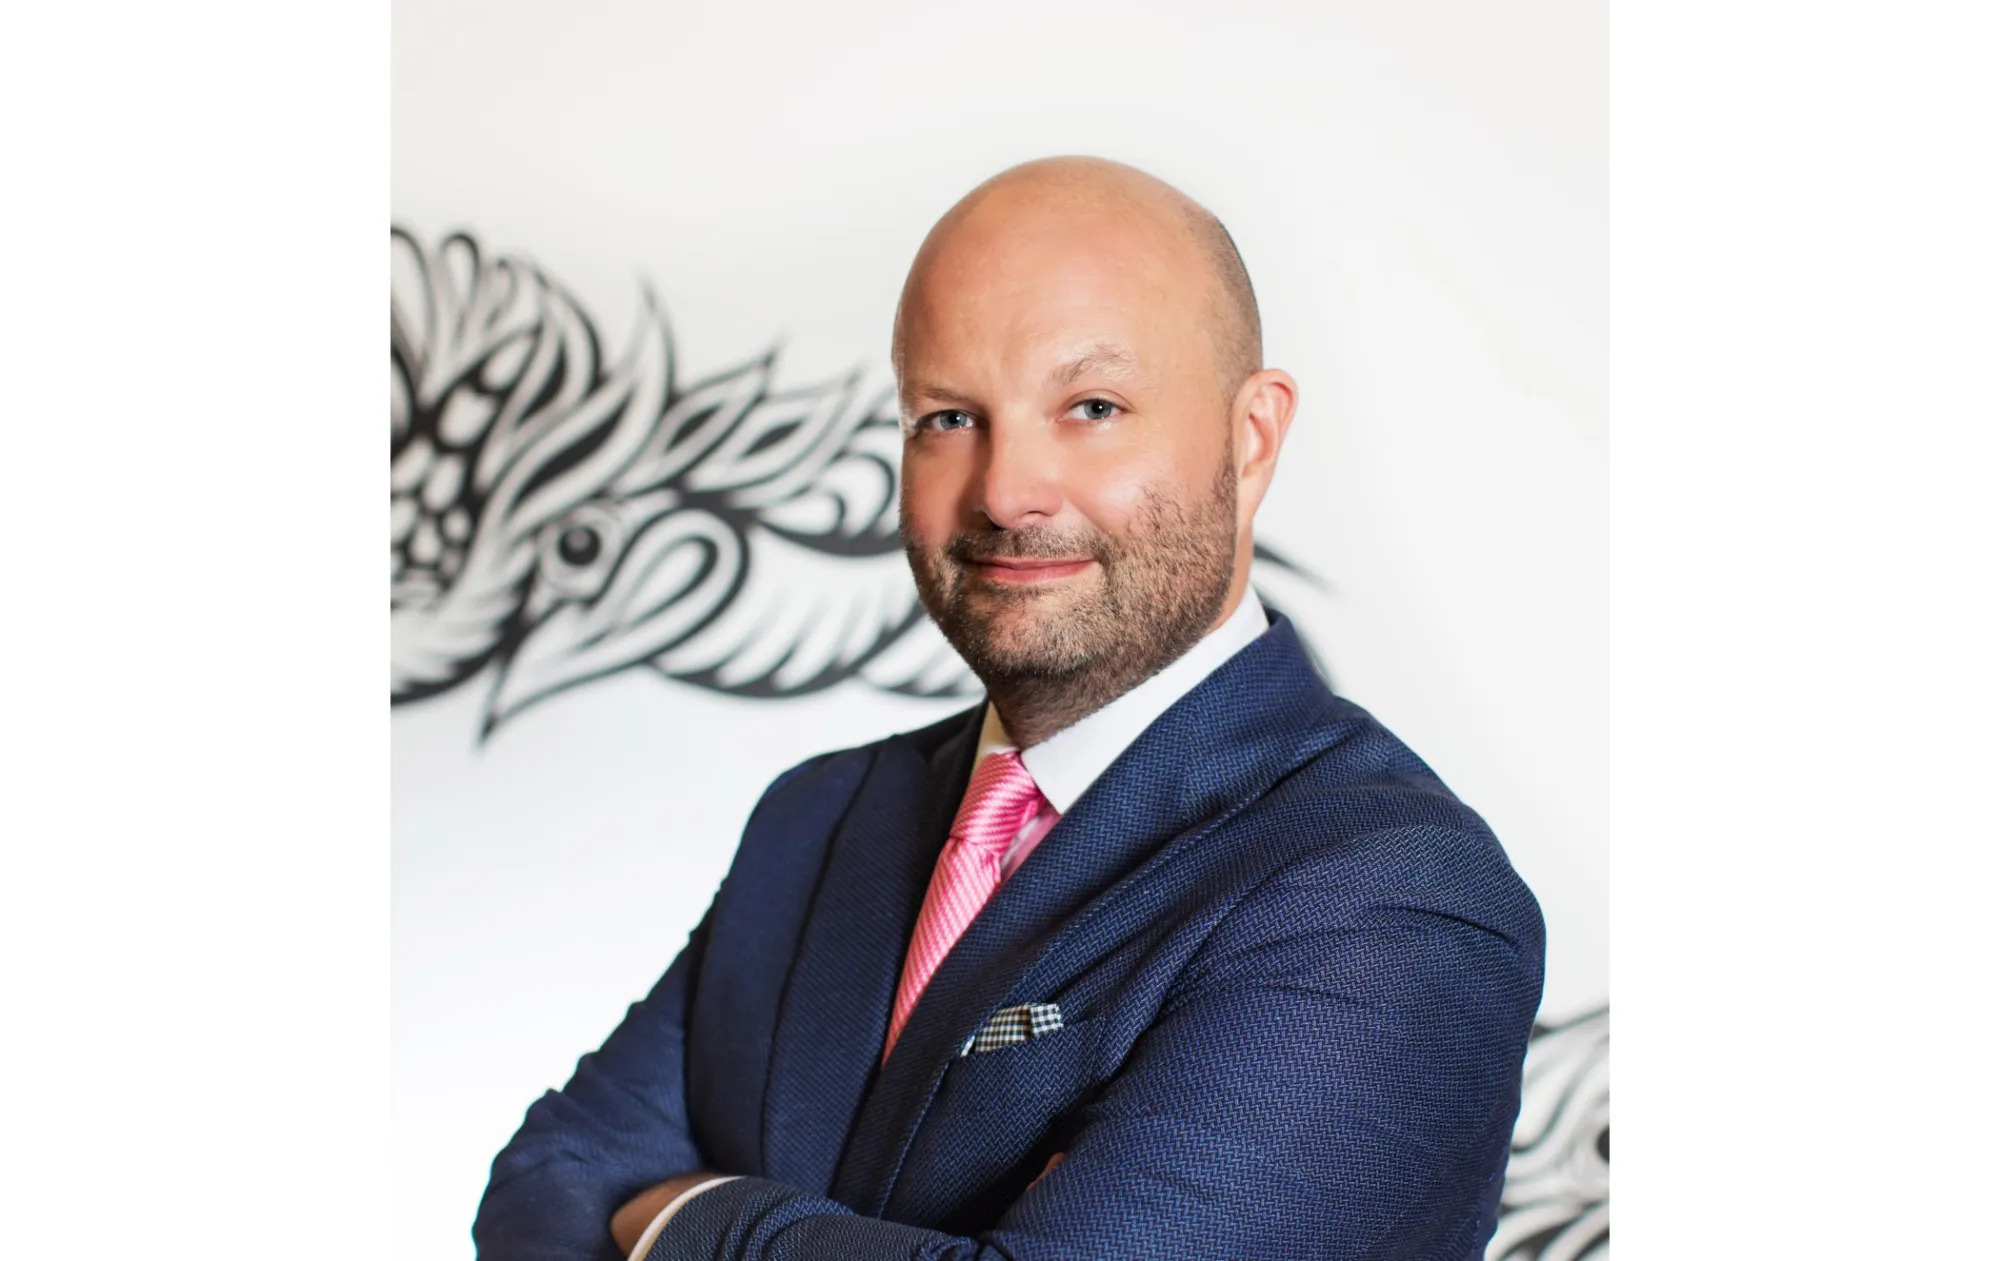 A closely cropped profile photo of ART SG cofounder Magnus Renfrew. He is wearing a navy blue suit, a white dress shirt, a pink striped tie, and his arms are crossed.